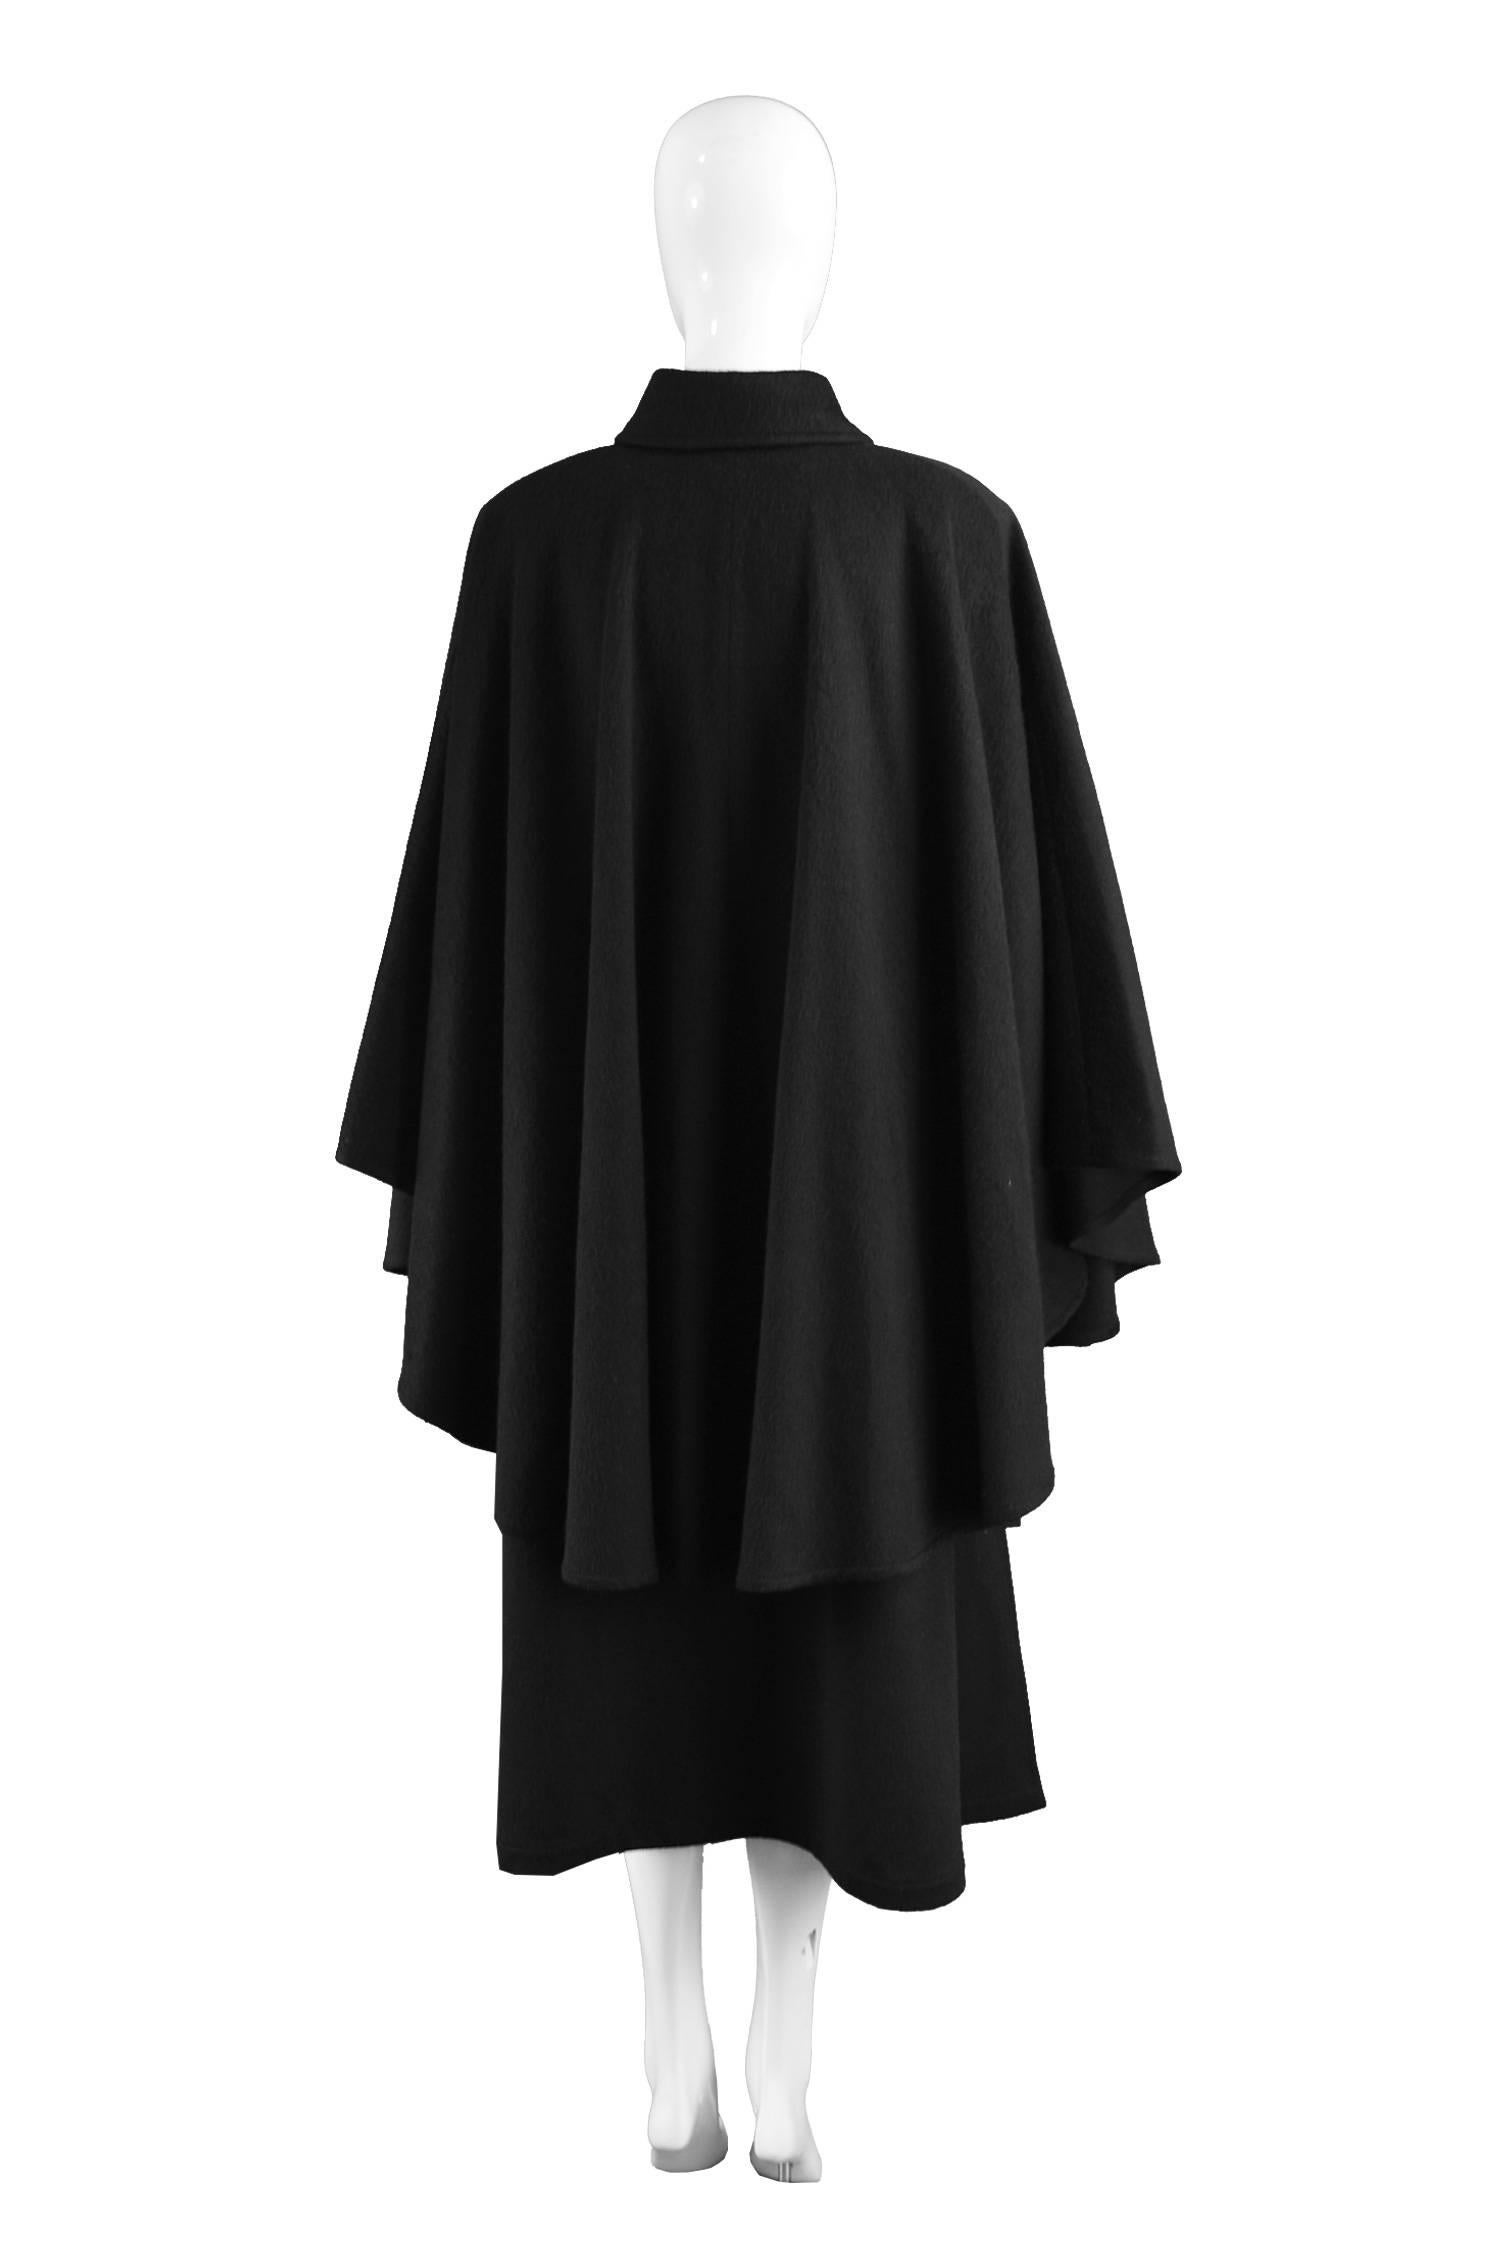 black evening GUY LAROCHE wool capecloak with ruffled collar. Vintage